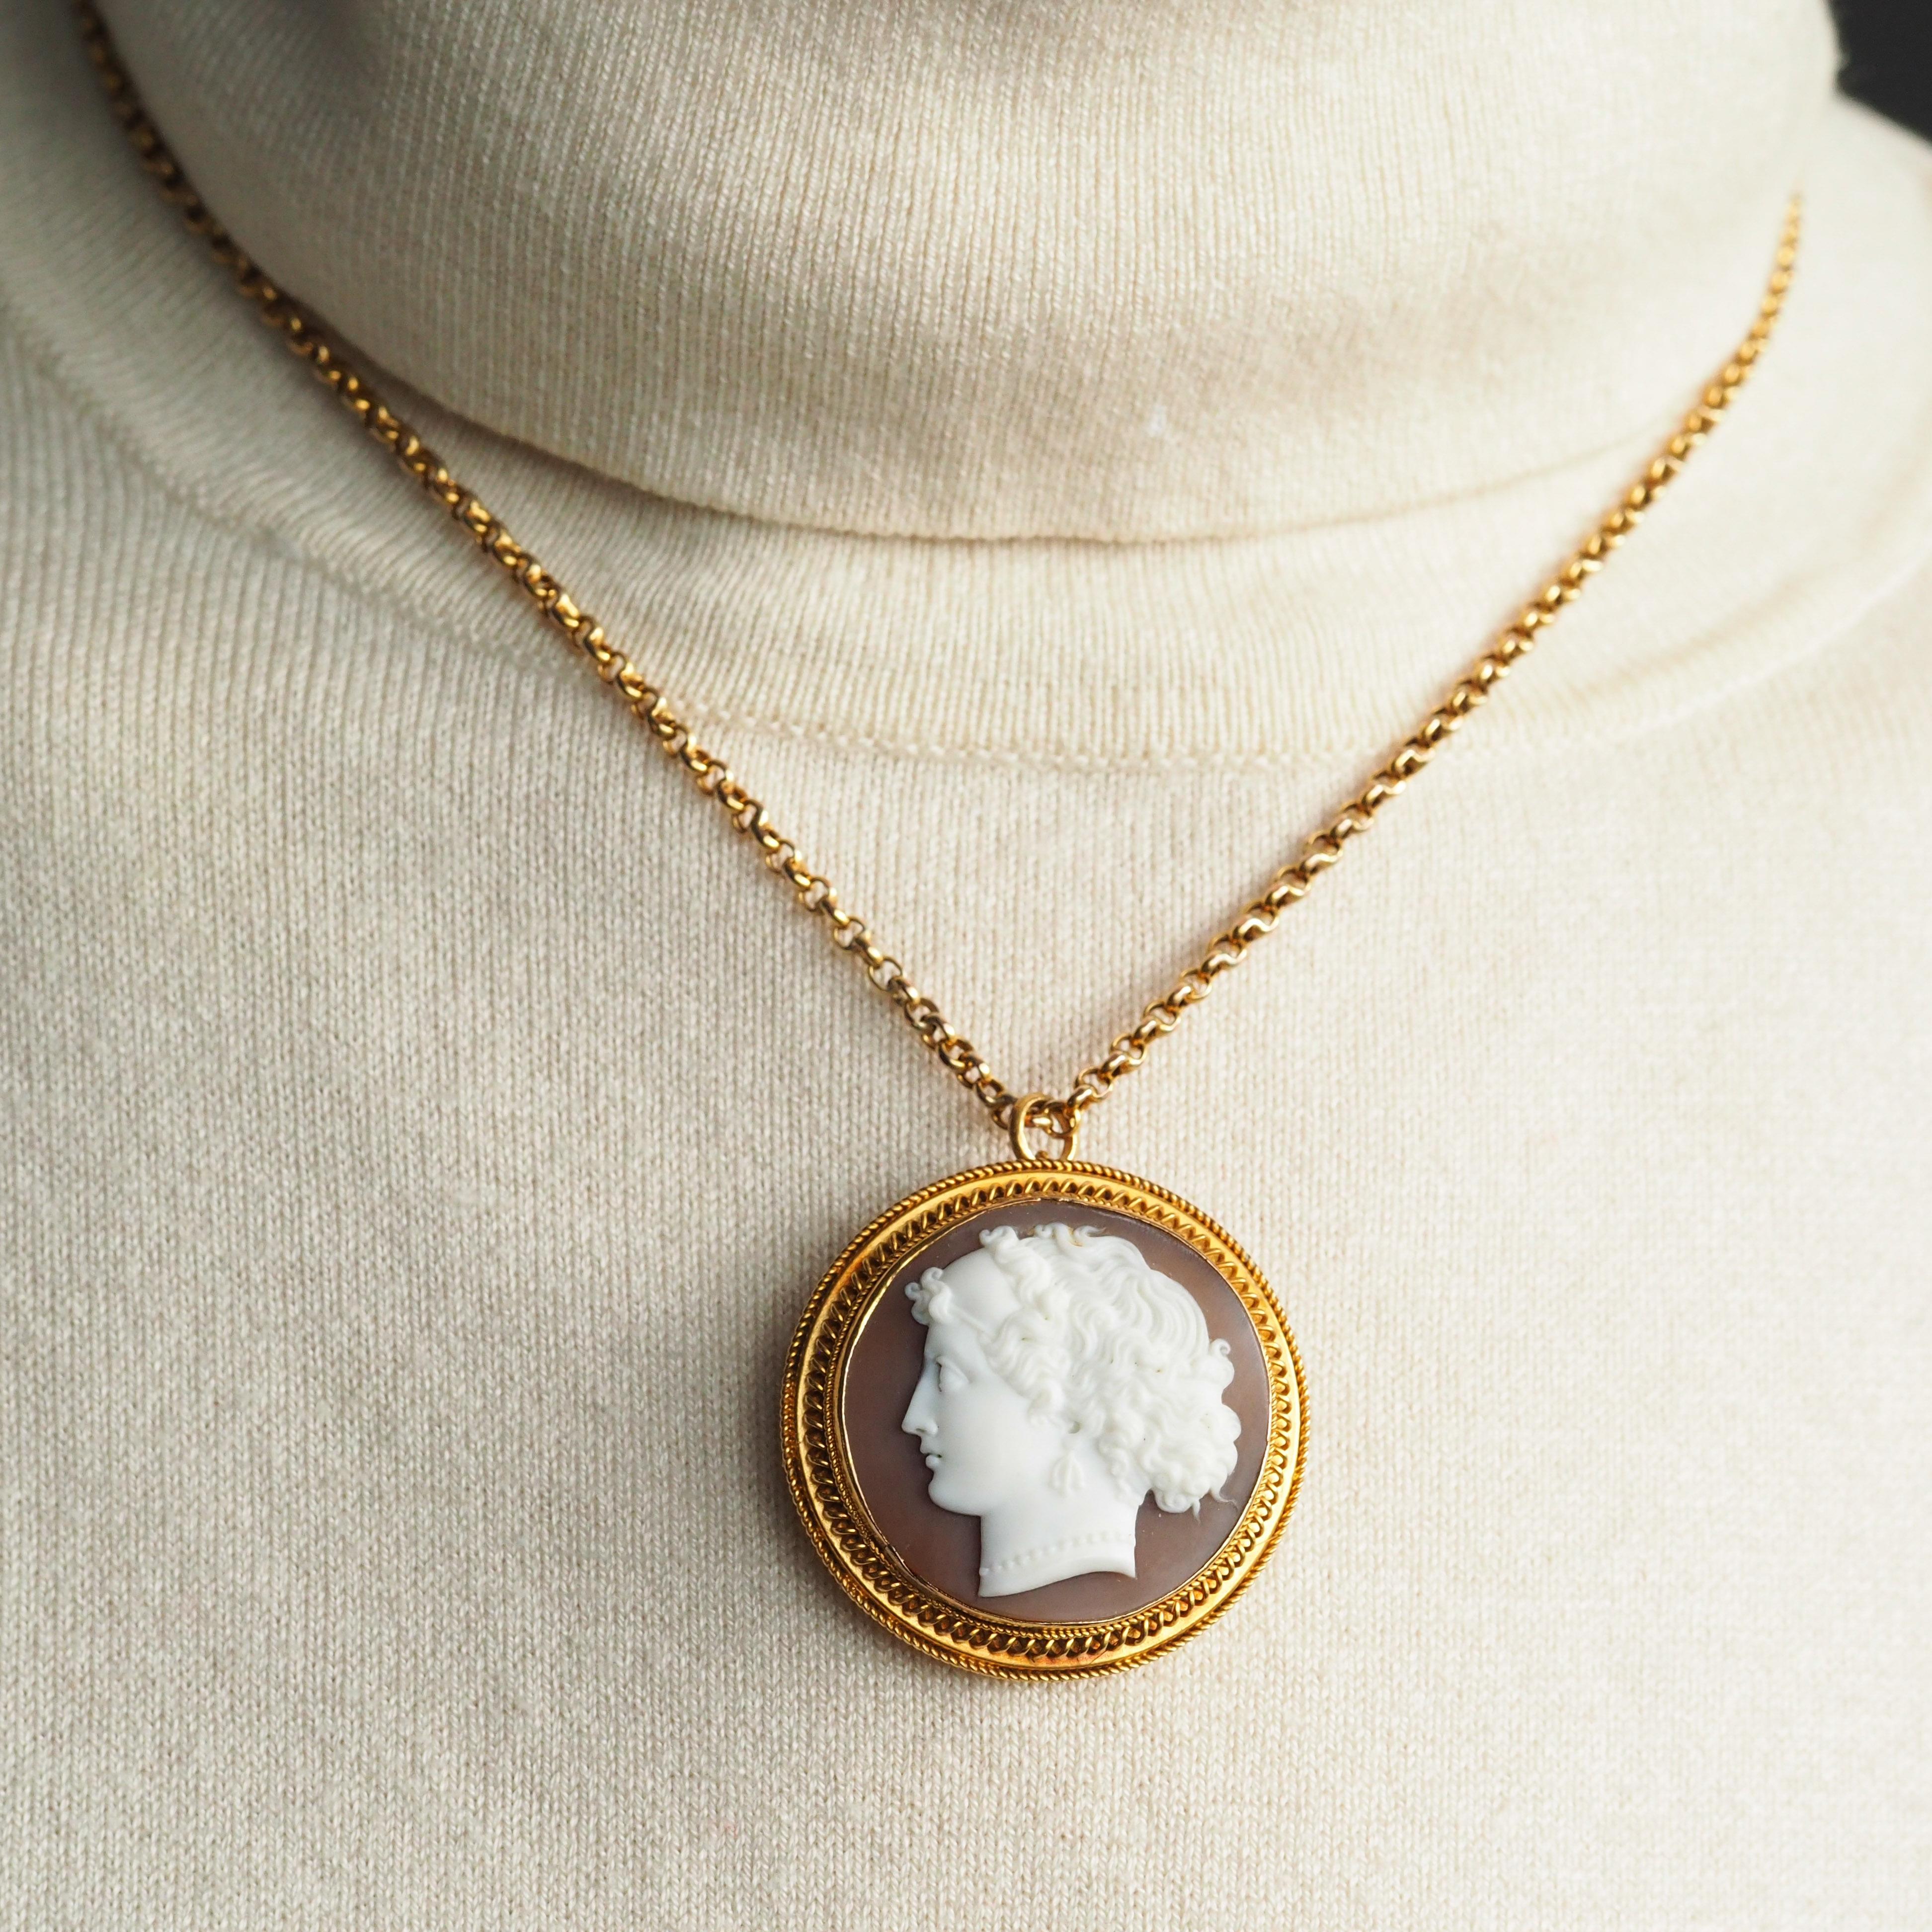 Antique Victorian Cameo 18K Gold Brooch/Pendant Necklace - c.1880 For Sale 6